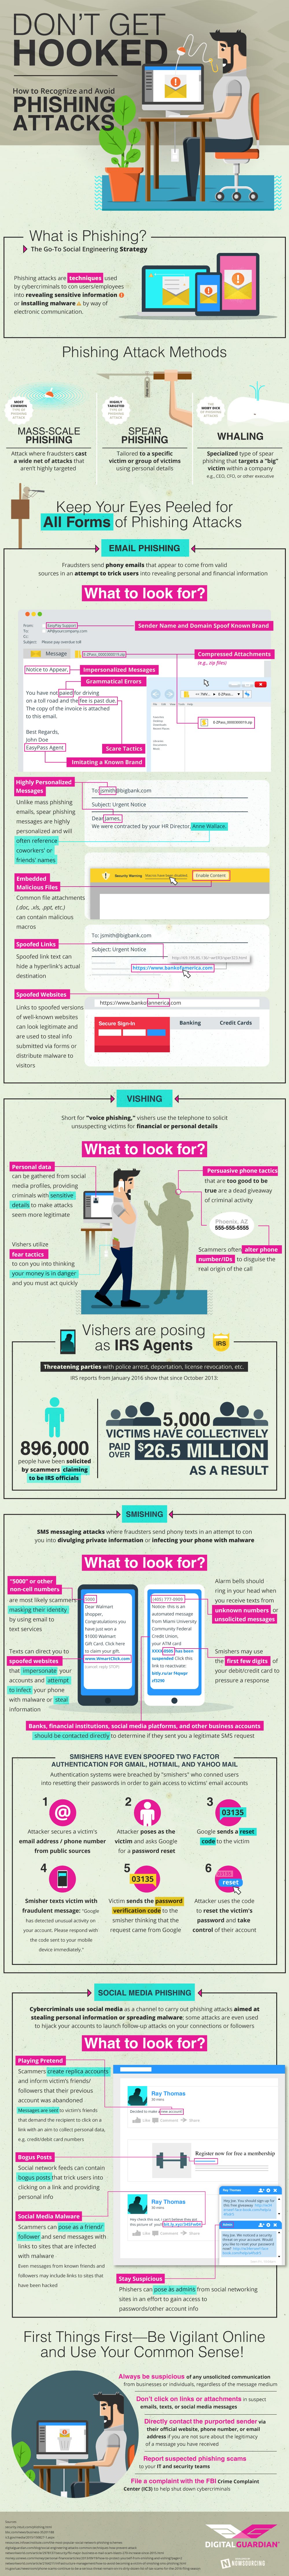 Don’t Get Hooked: How to Recognize and Avoid Phishing Attacks - #Infographic